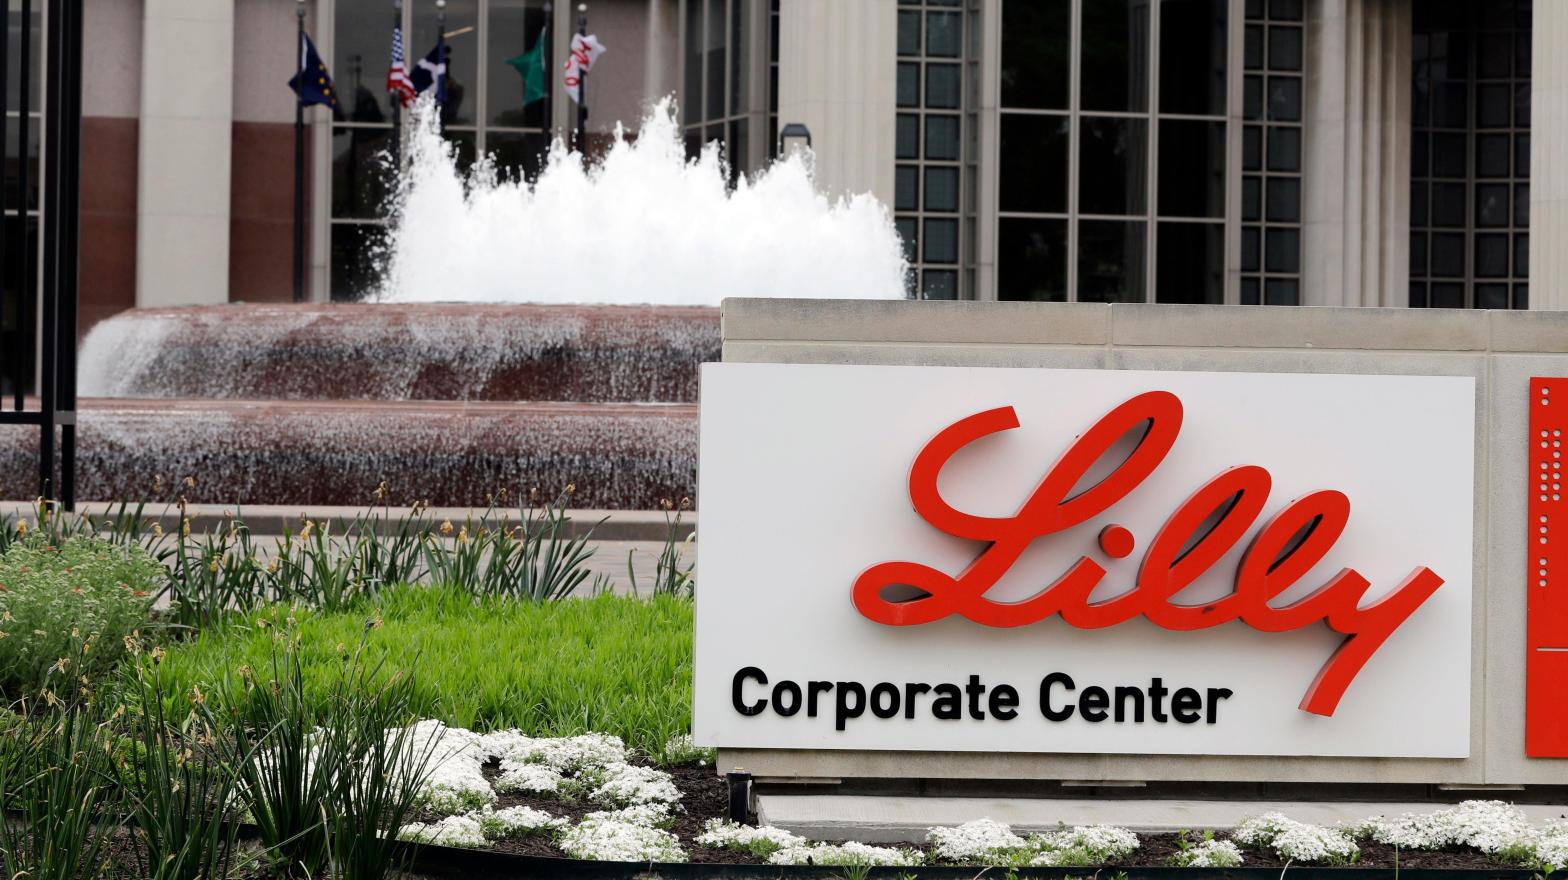 Pharma company Eli Lilly has been criticised heavily in the past for the price of insulin, but the company has claimed it is not profiting off those increases. (Photo: Darron Cummings, AP)